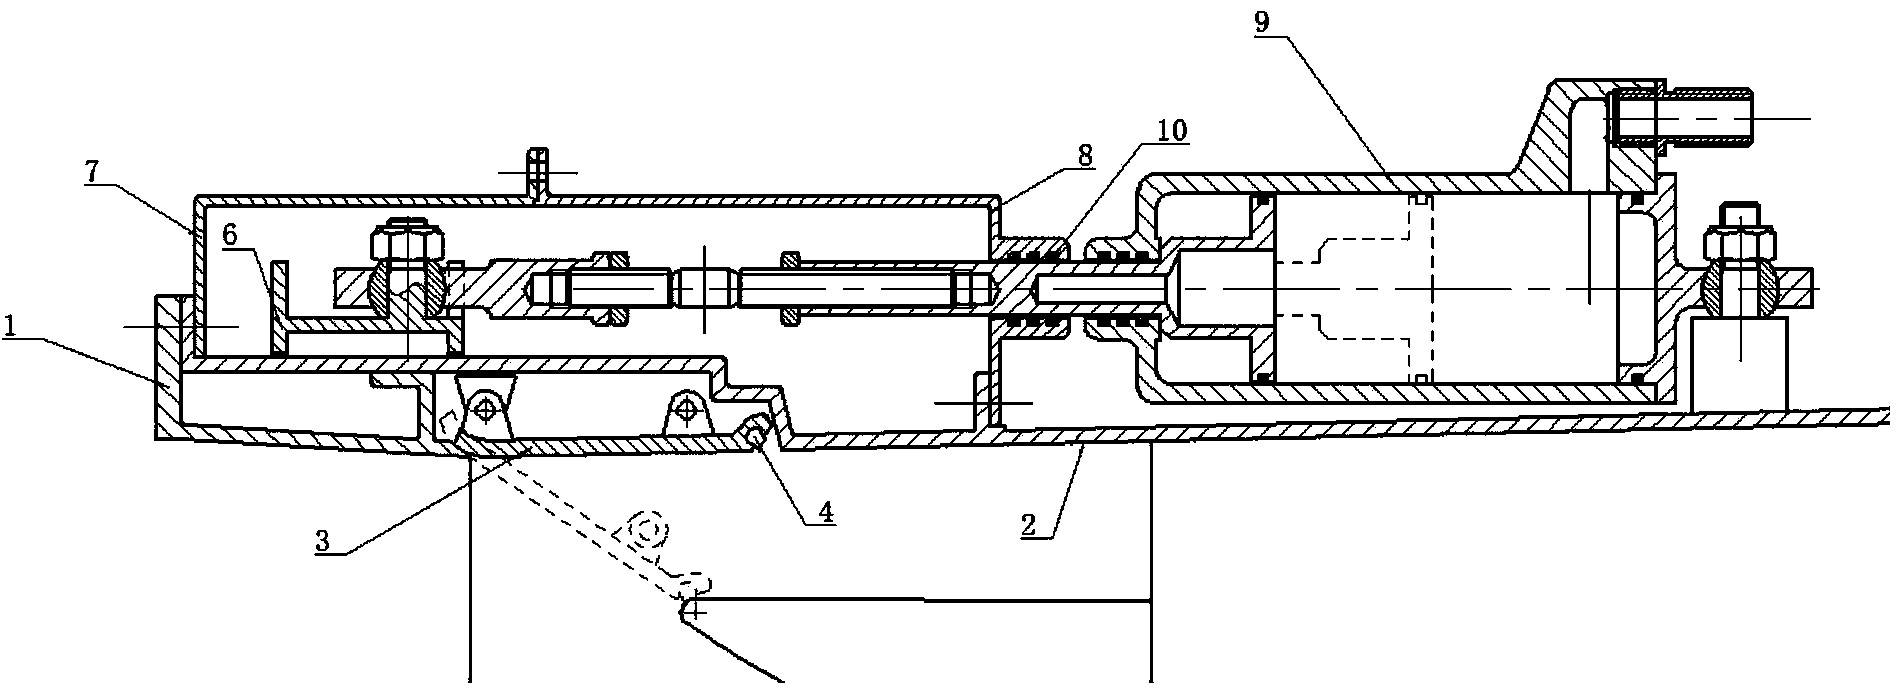 Mode switch valve of variable-cycle engine adjustable mechanism